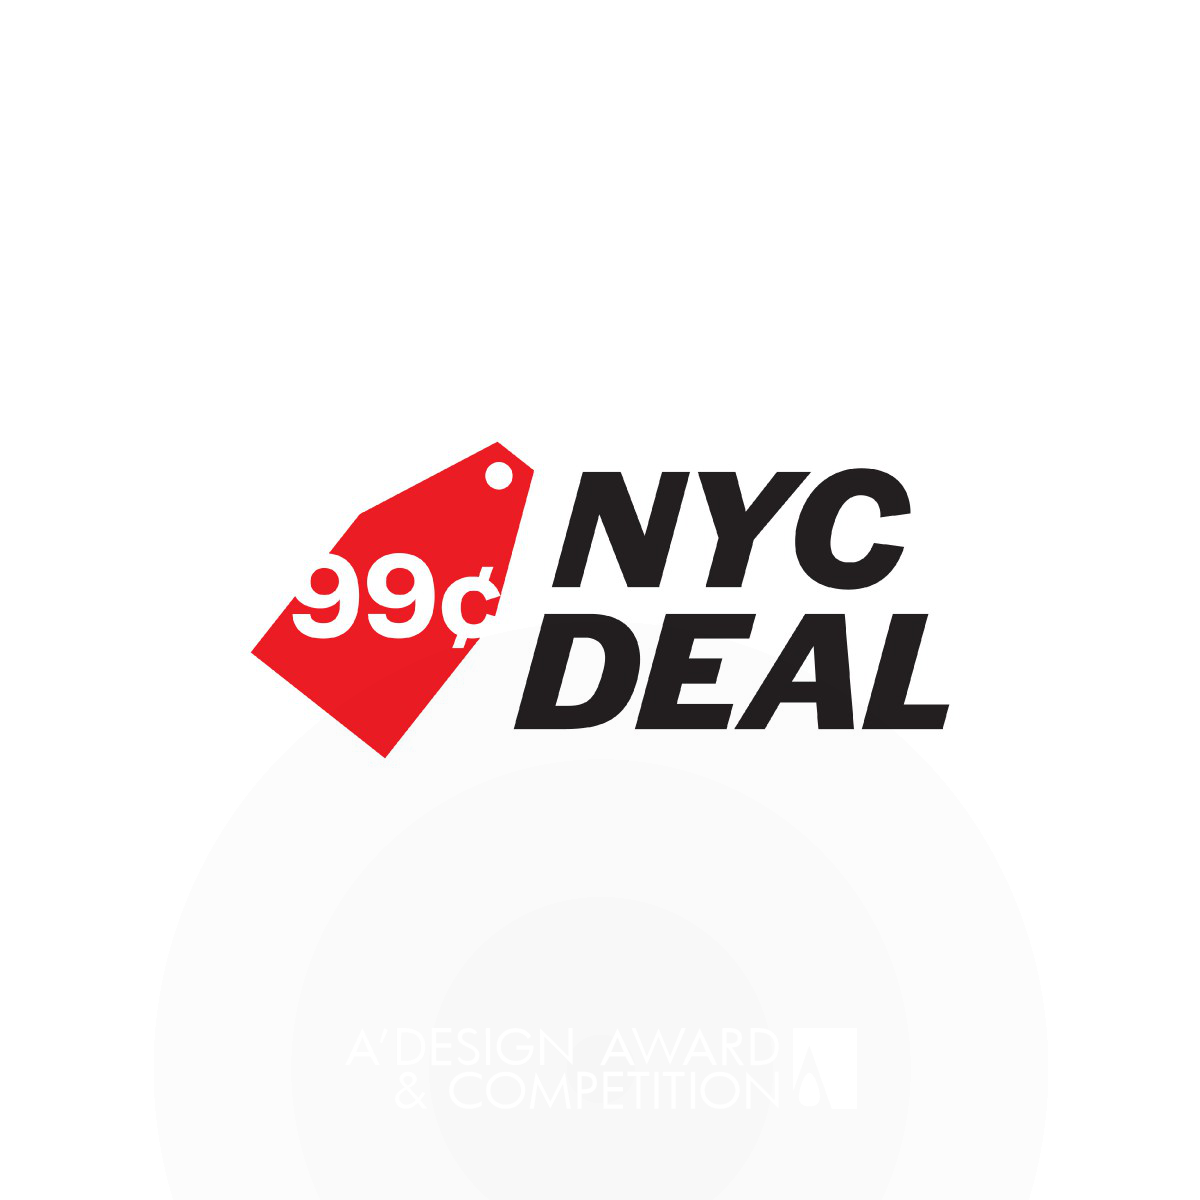 NYC Deal 99 Cent Store Brand Identity